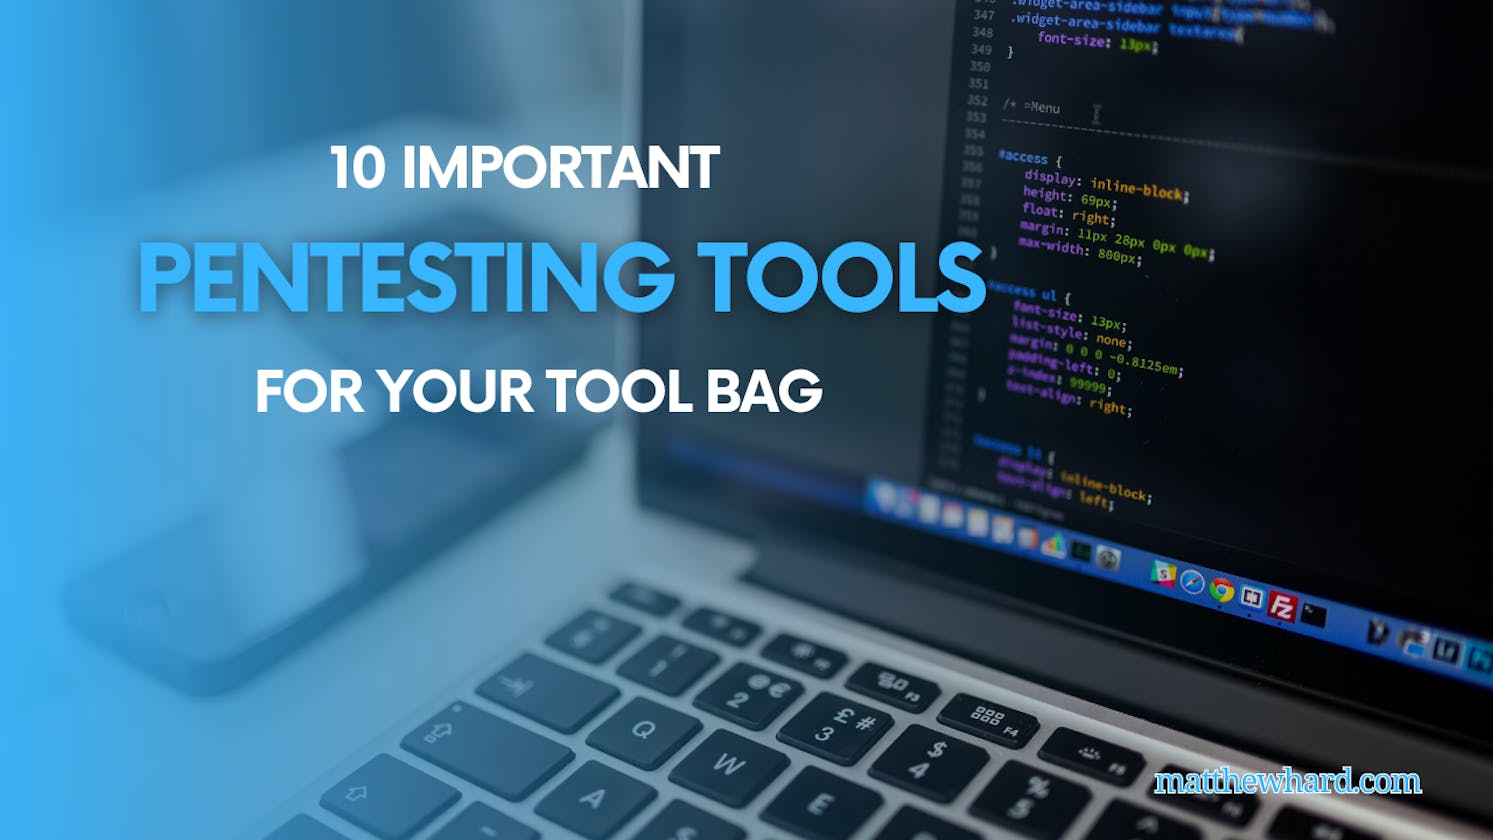 10 Important Pentesting Tools for Your Tool Bag